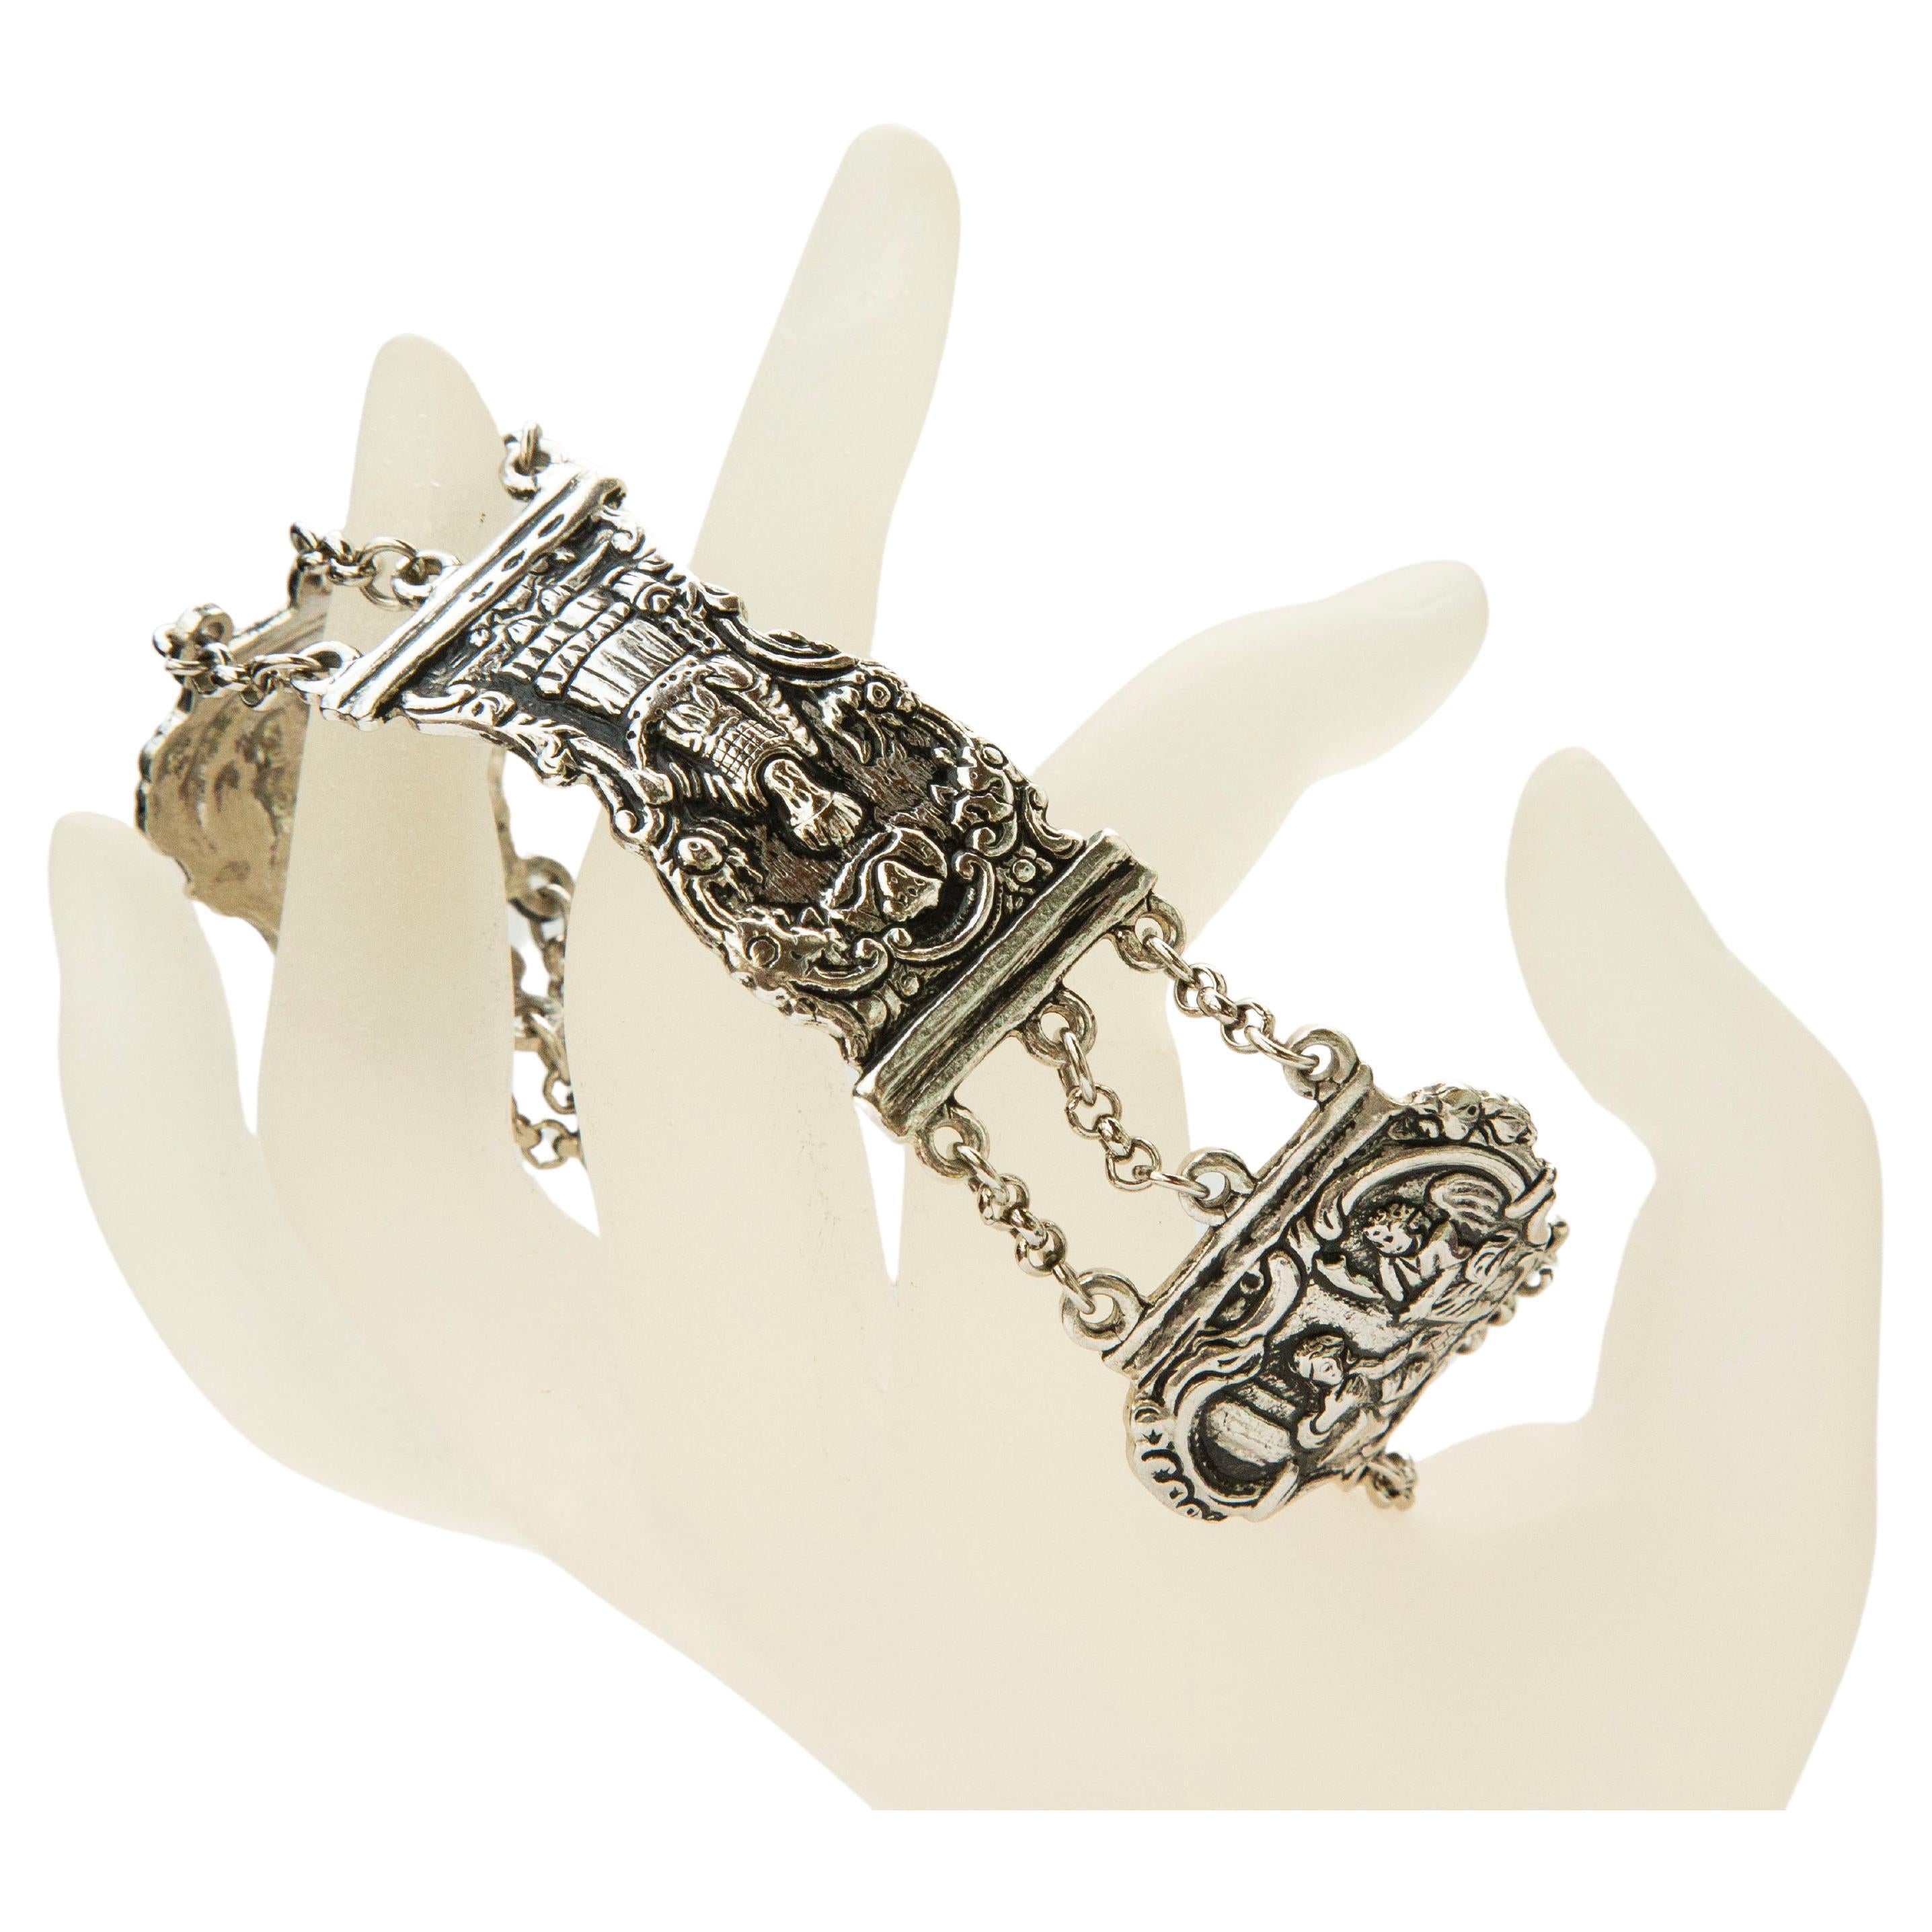 Silver Bracelet Made of Antique Silver Bible Closure 1700s/1800s For Sale